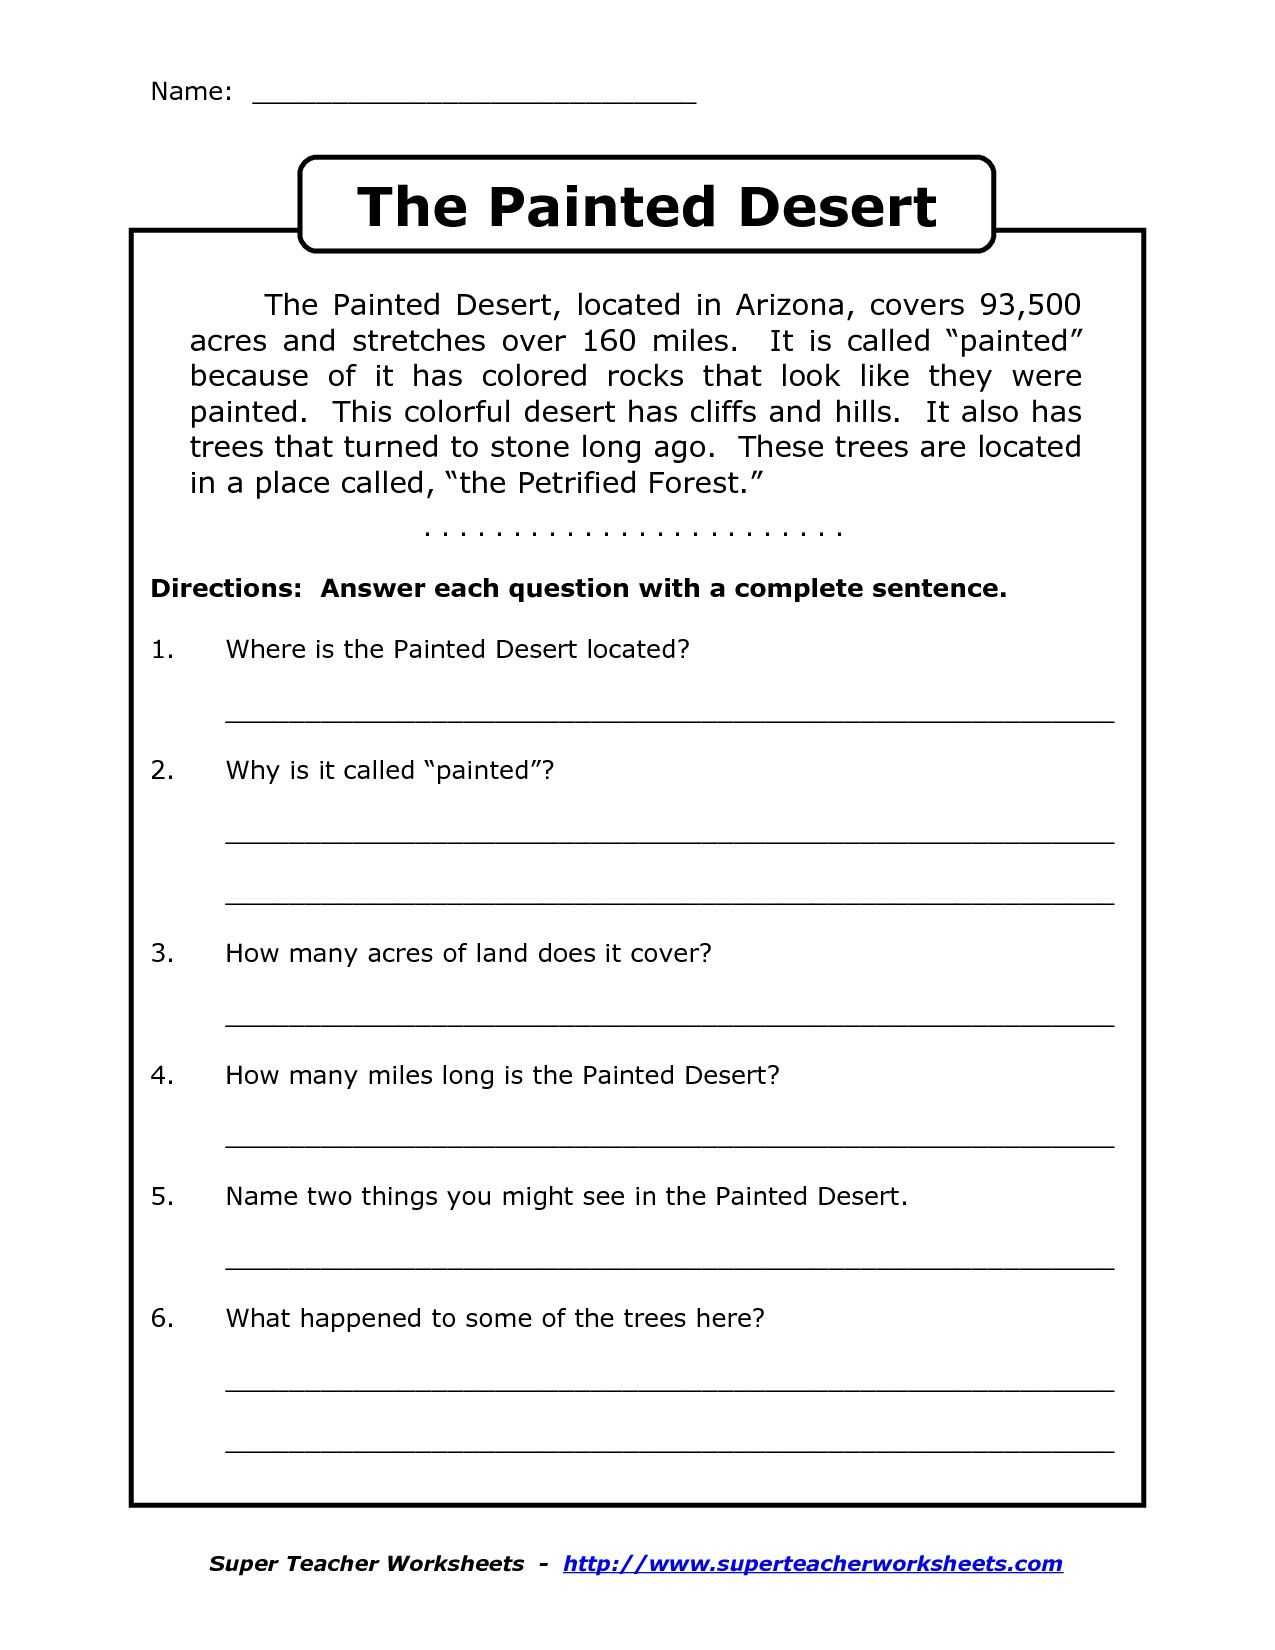 Cause and Effect Worksheets 2nd Grade or Prehension Worksheet for 1st Grade Y2 P3 the Painted Desert